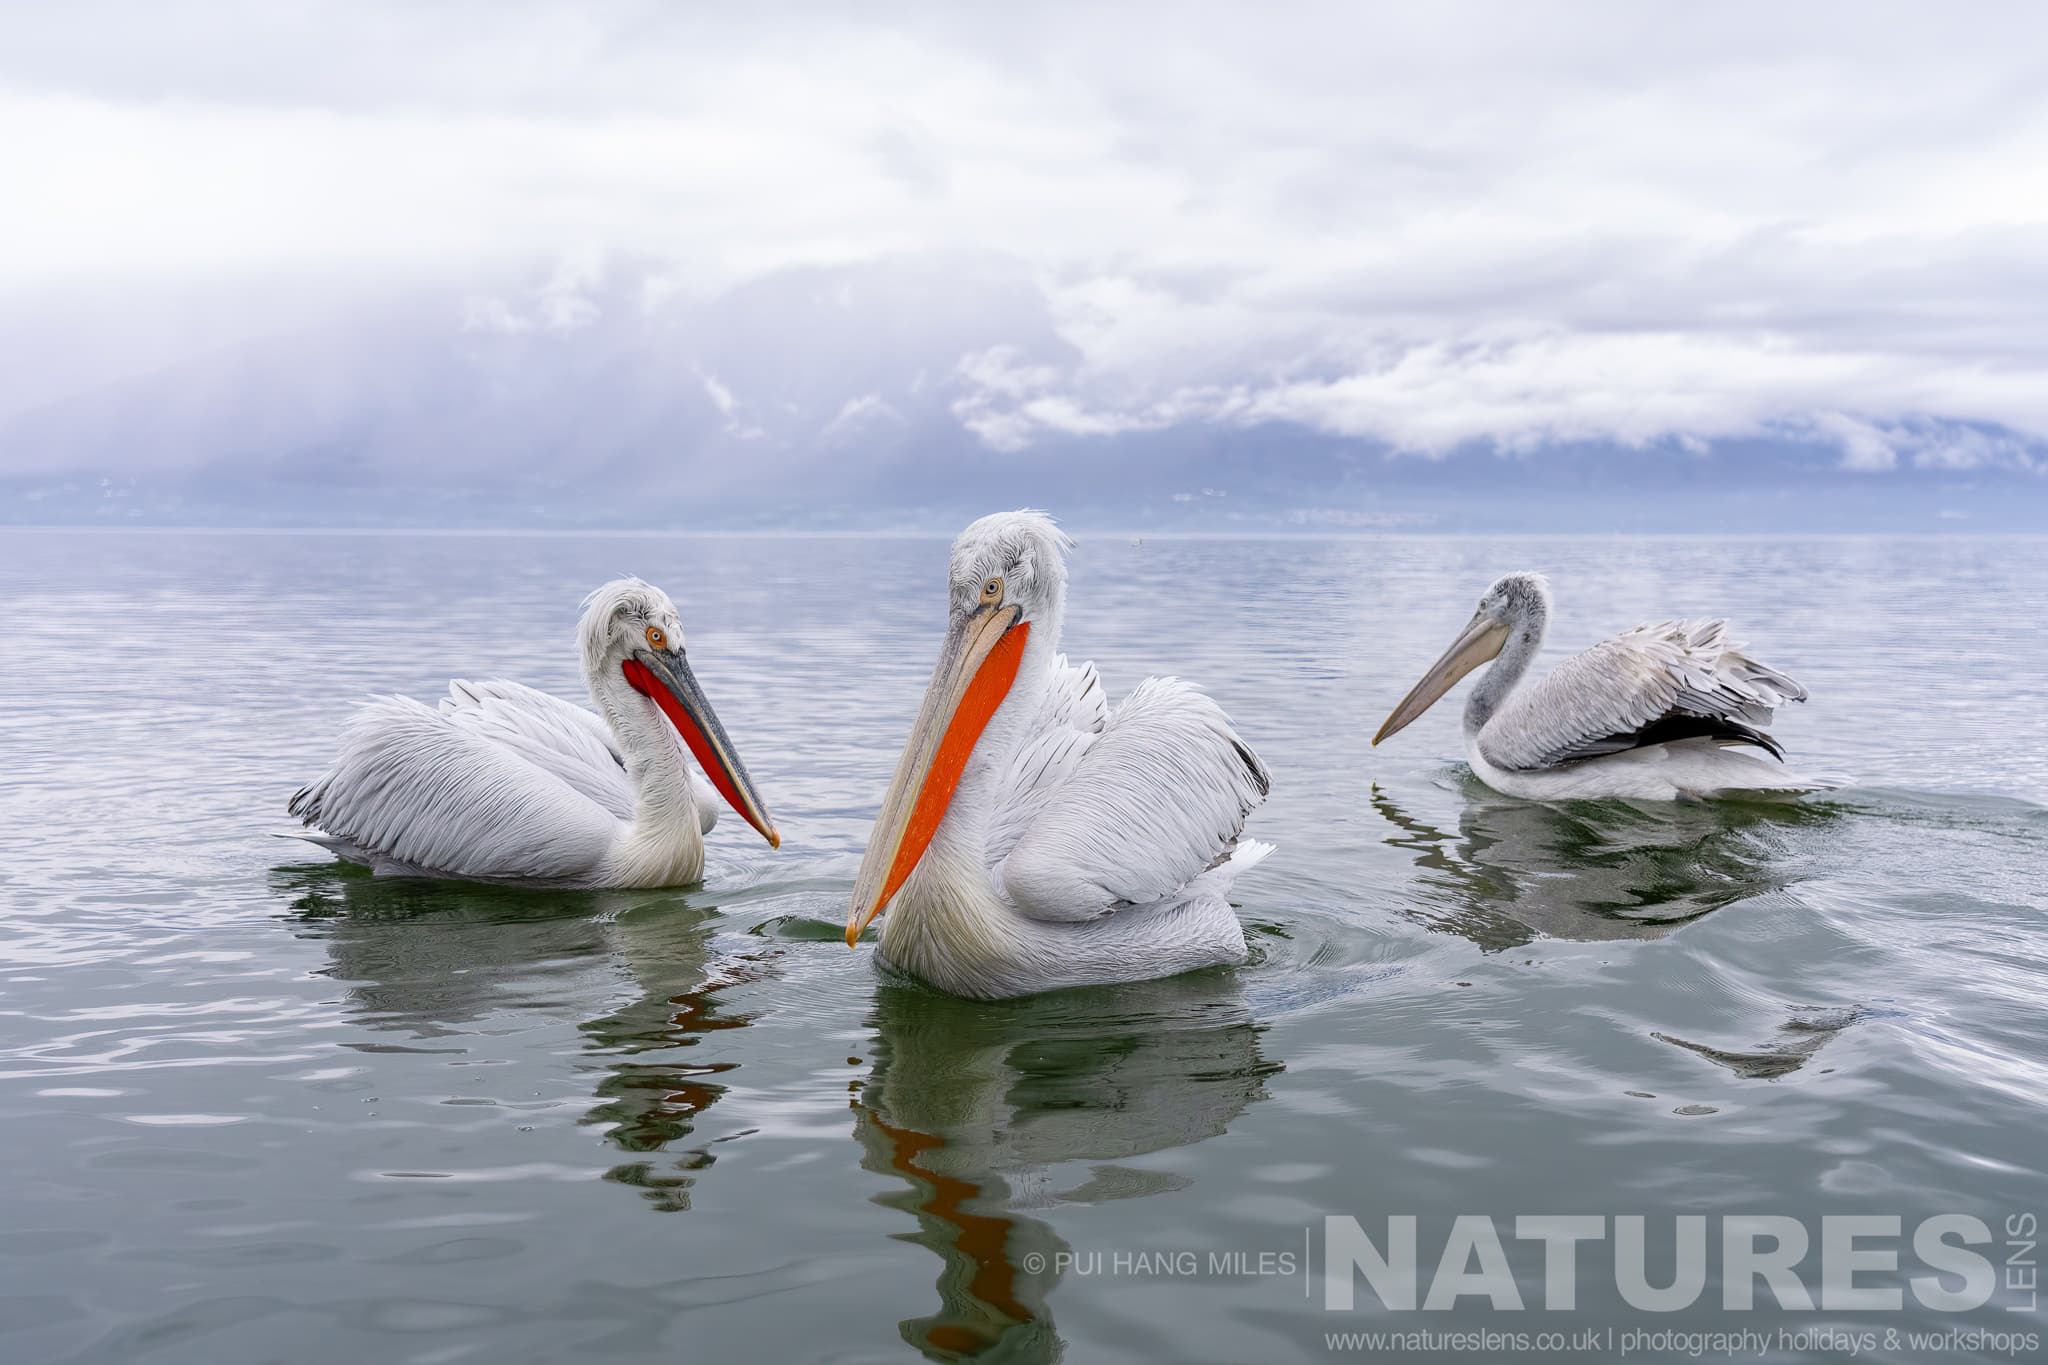 A Trio Of The Dalmatian Pelicans Of Greece Drifting On The Waters Of Lake Kerkini